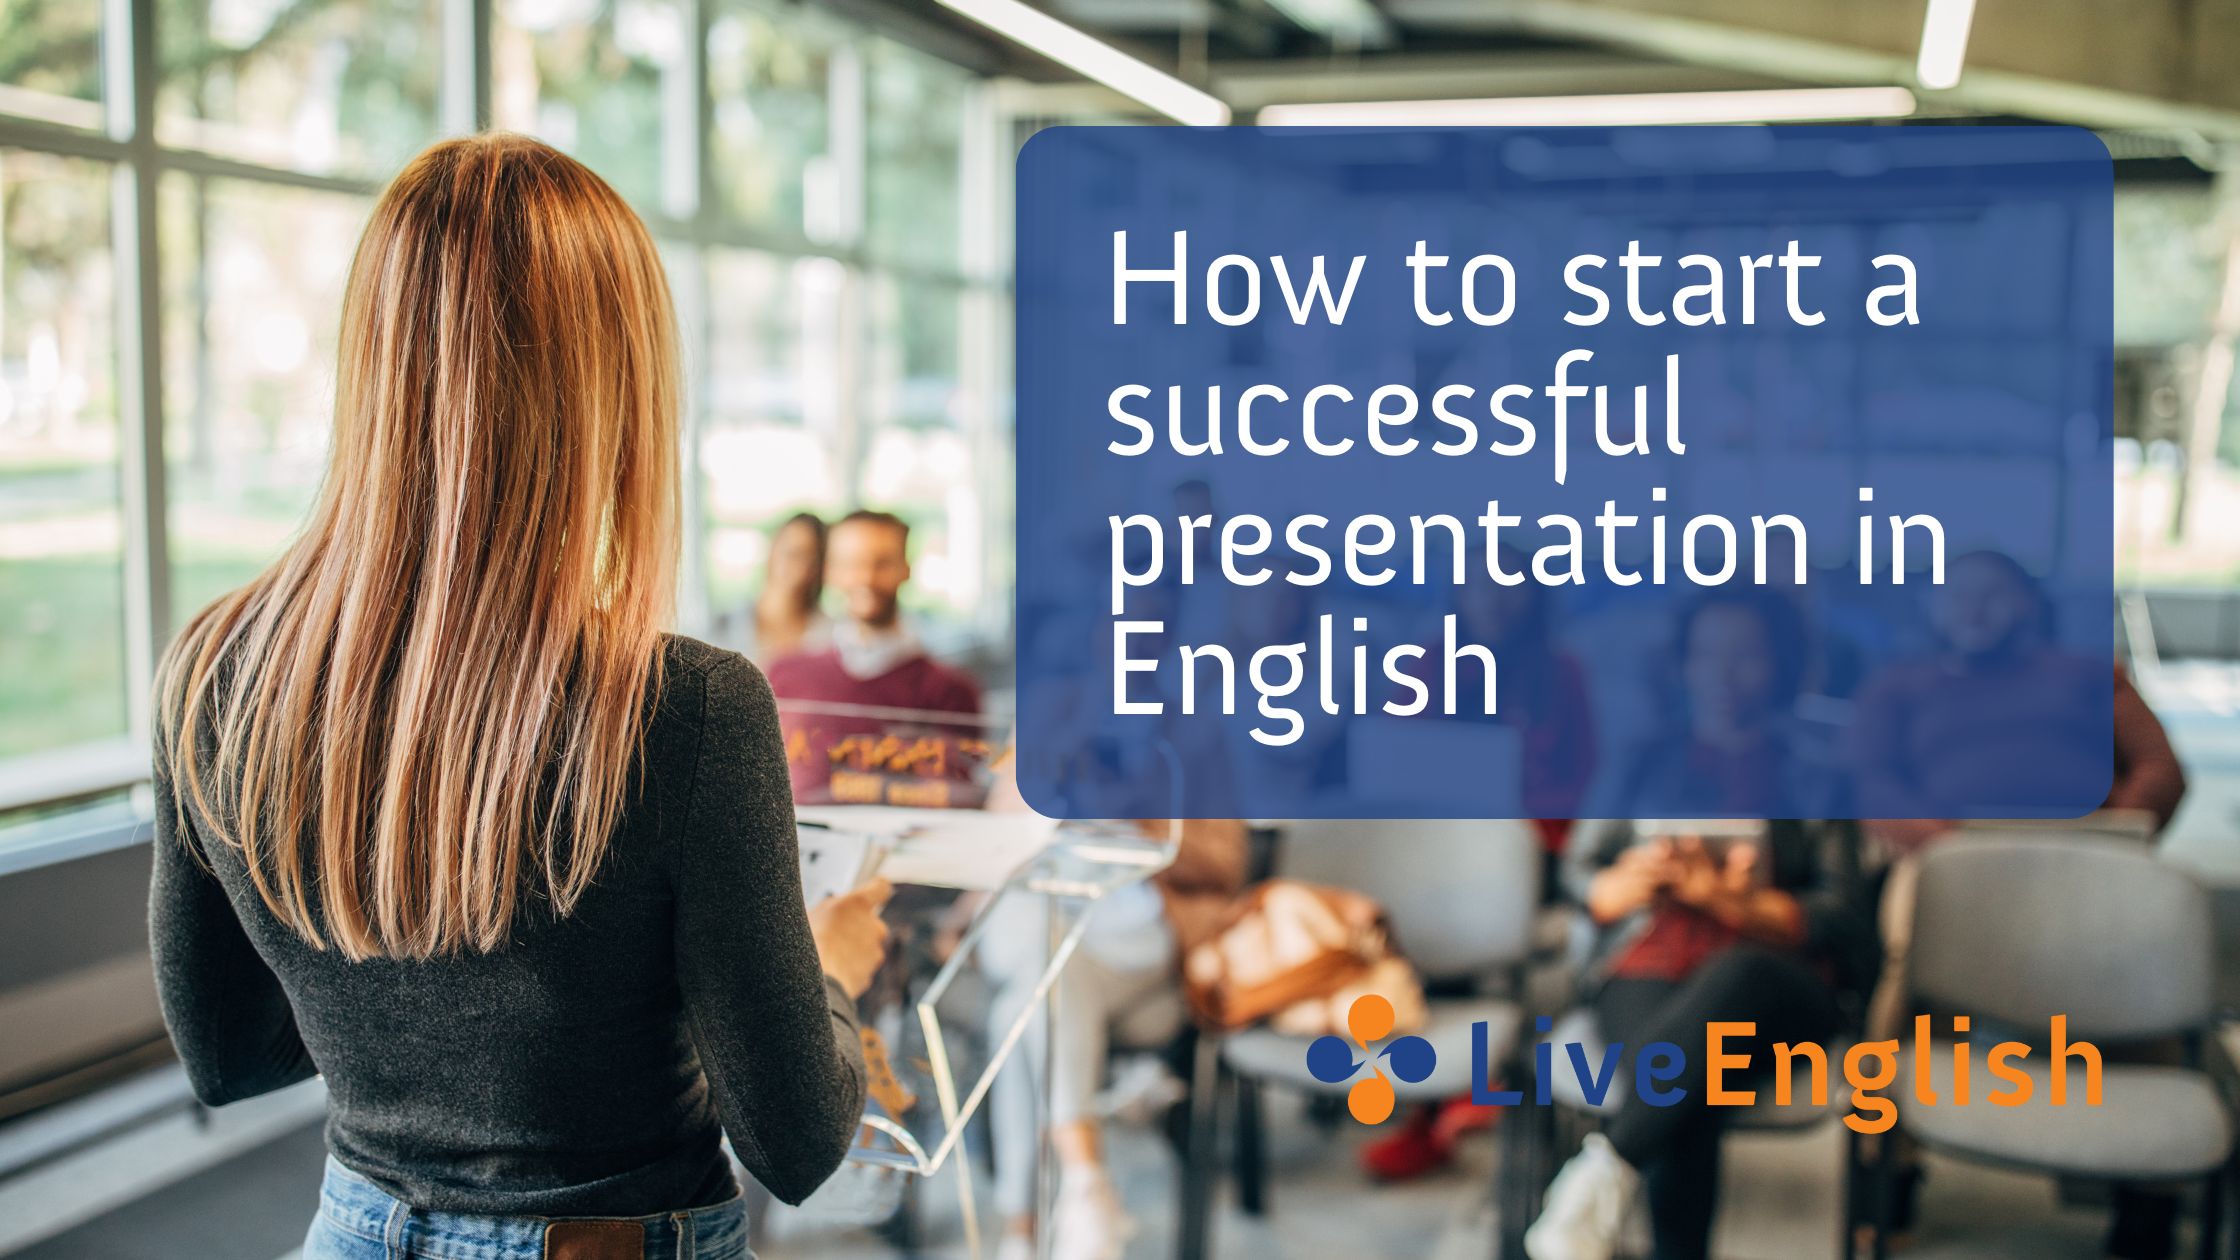 how to start presentation in english for students in college